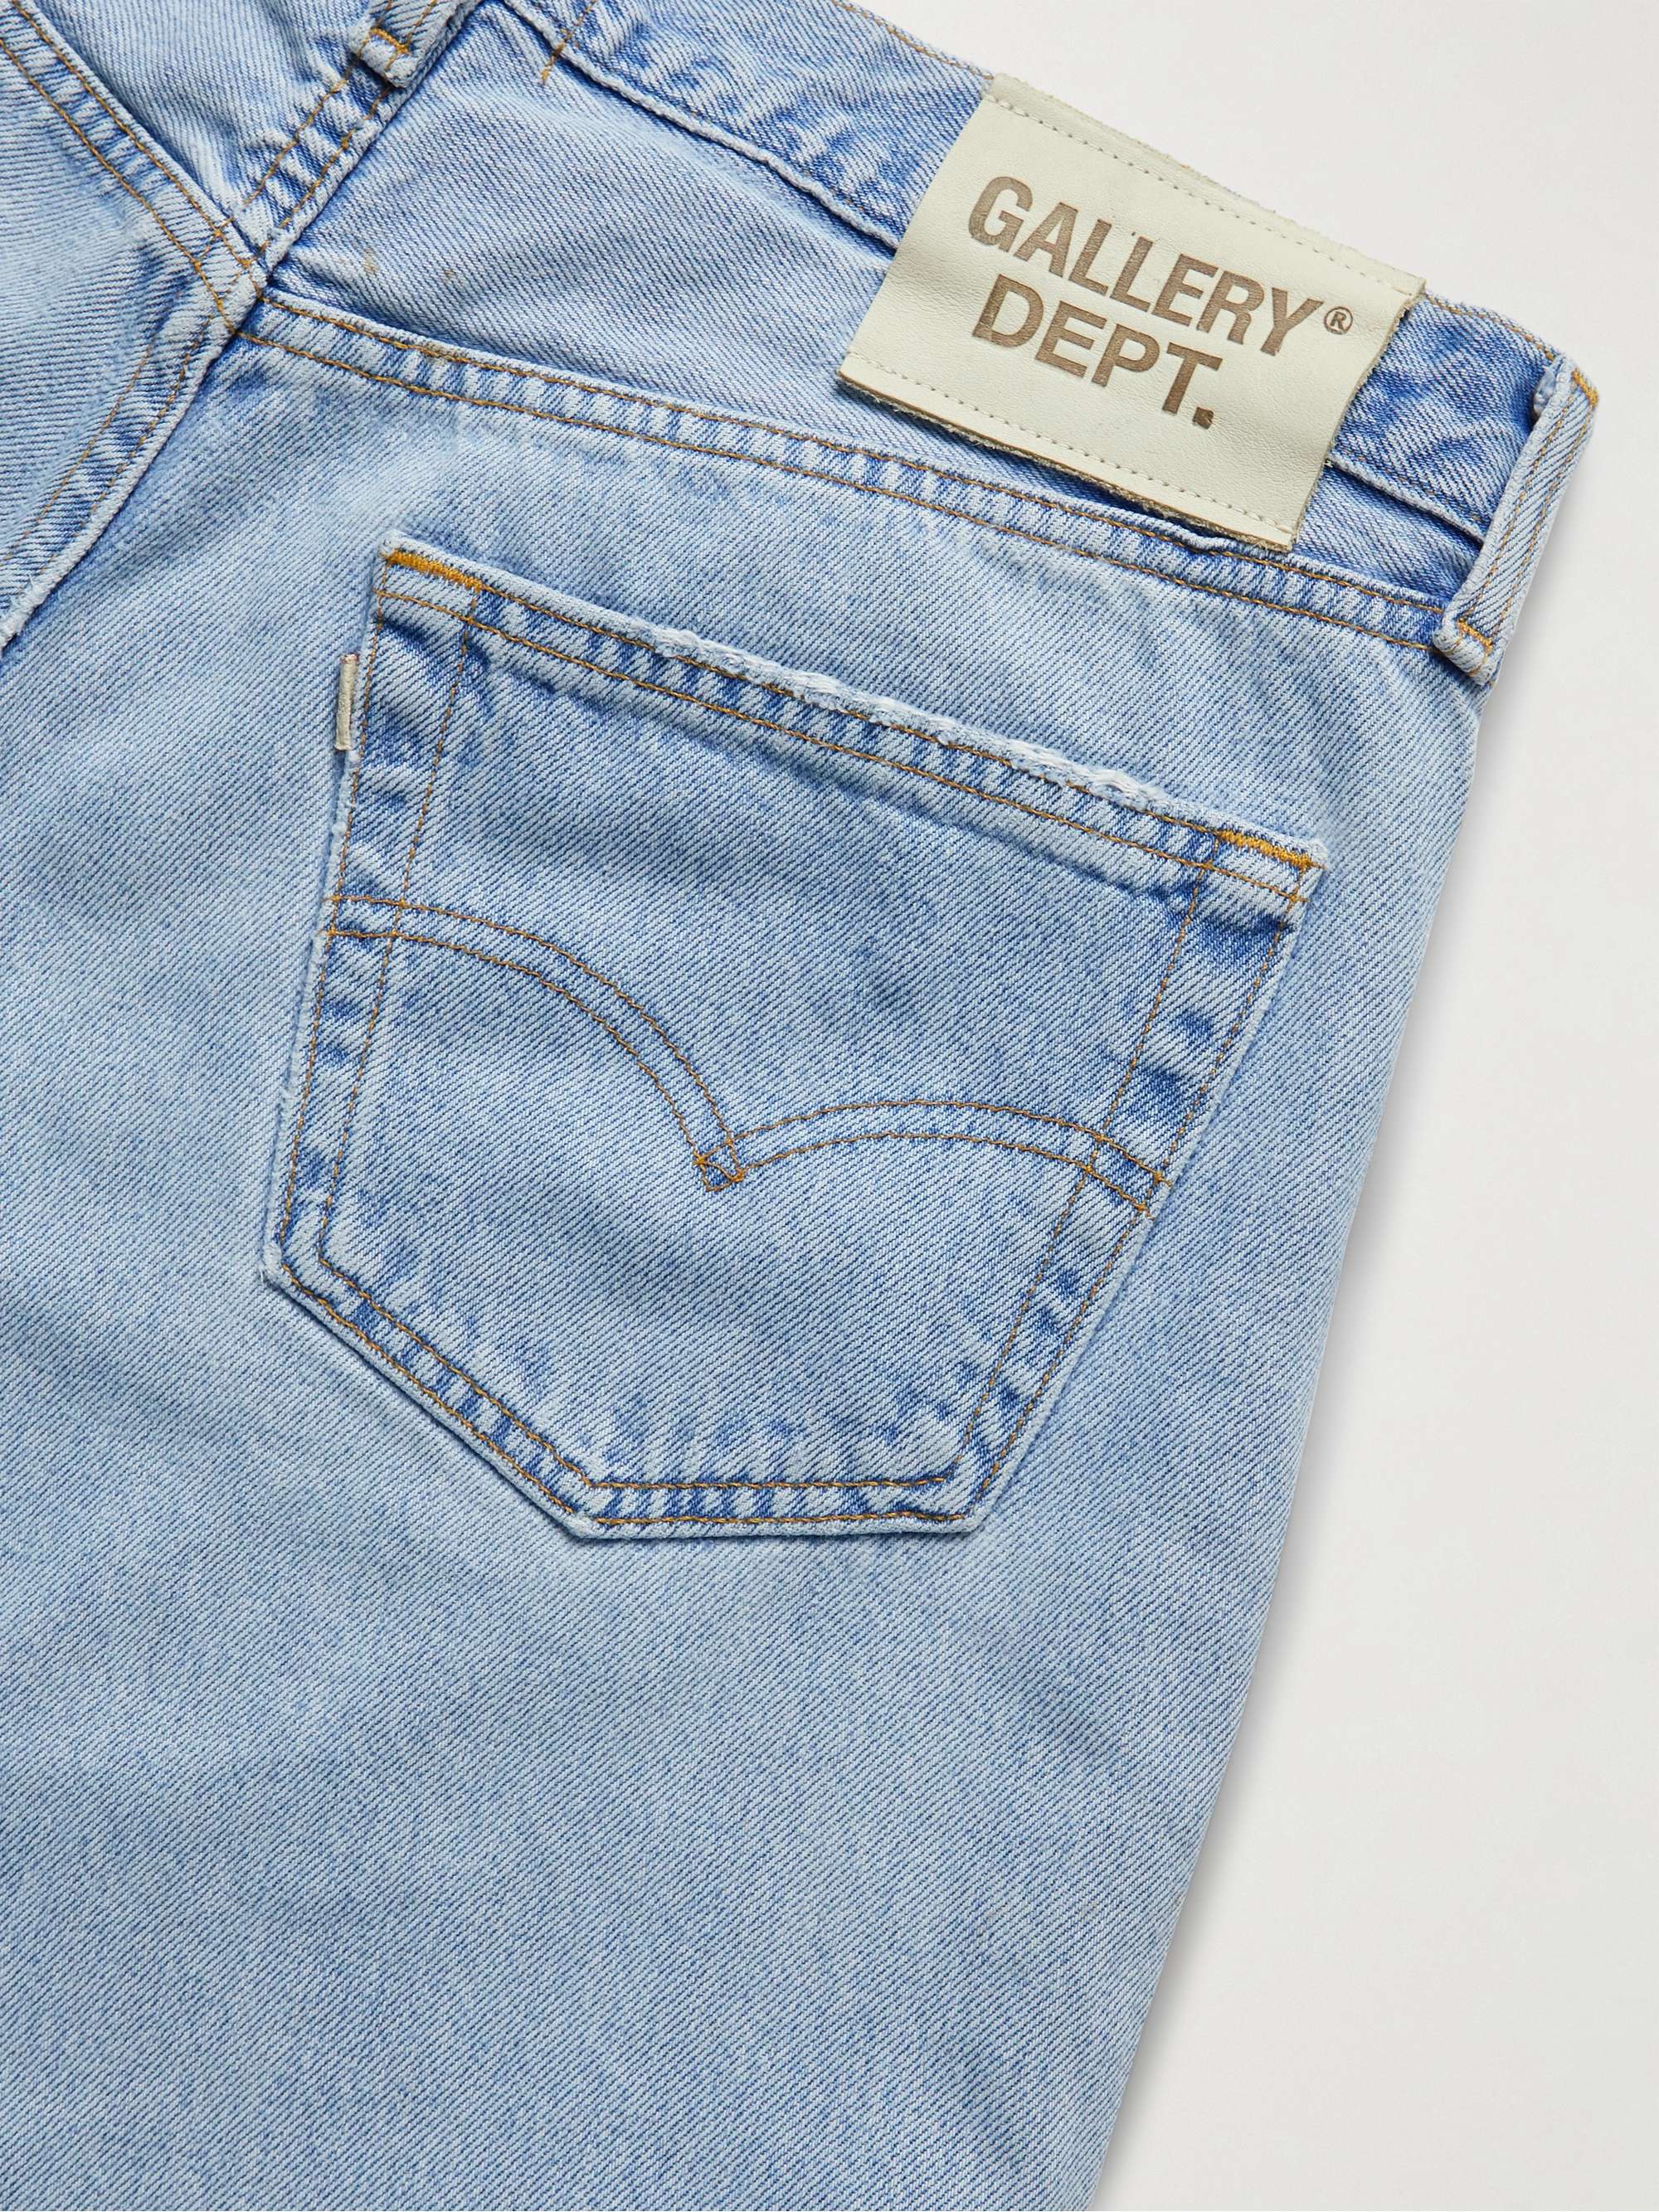 GALLERY DEPT. Indiana Flare Slim-Fit Distressed Jeans